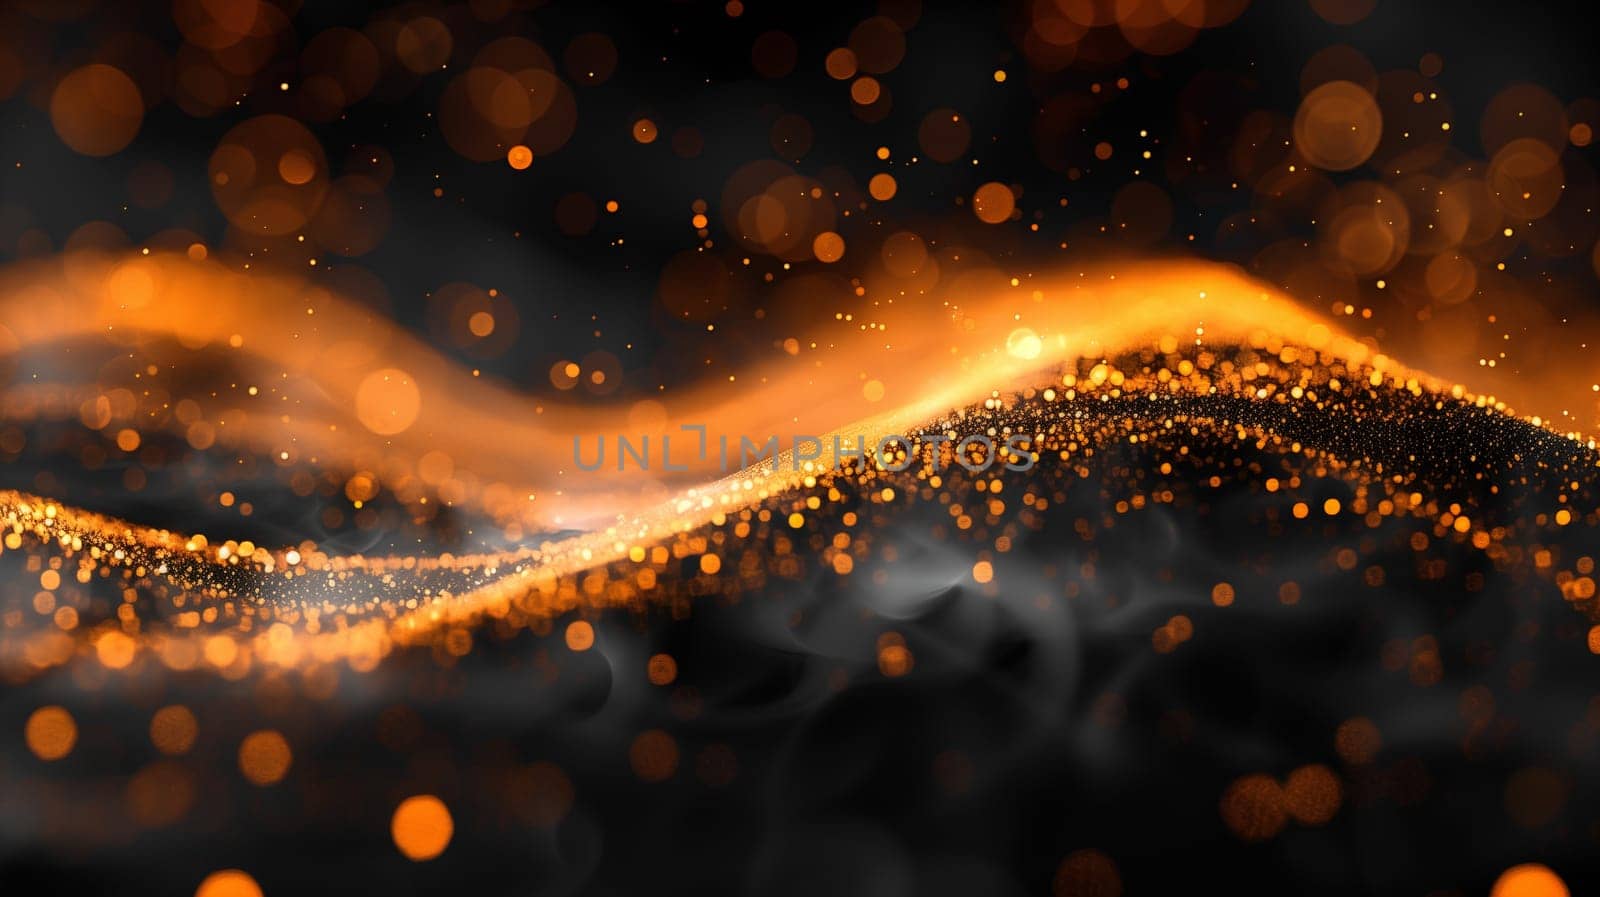 Sparkling Golden Particles Creating Waves in a Dark Studio Setting by chrisroll